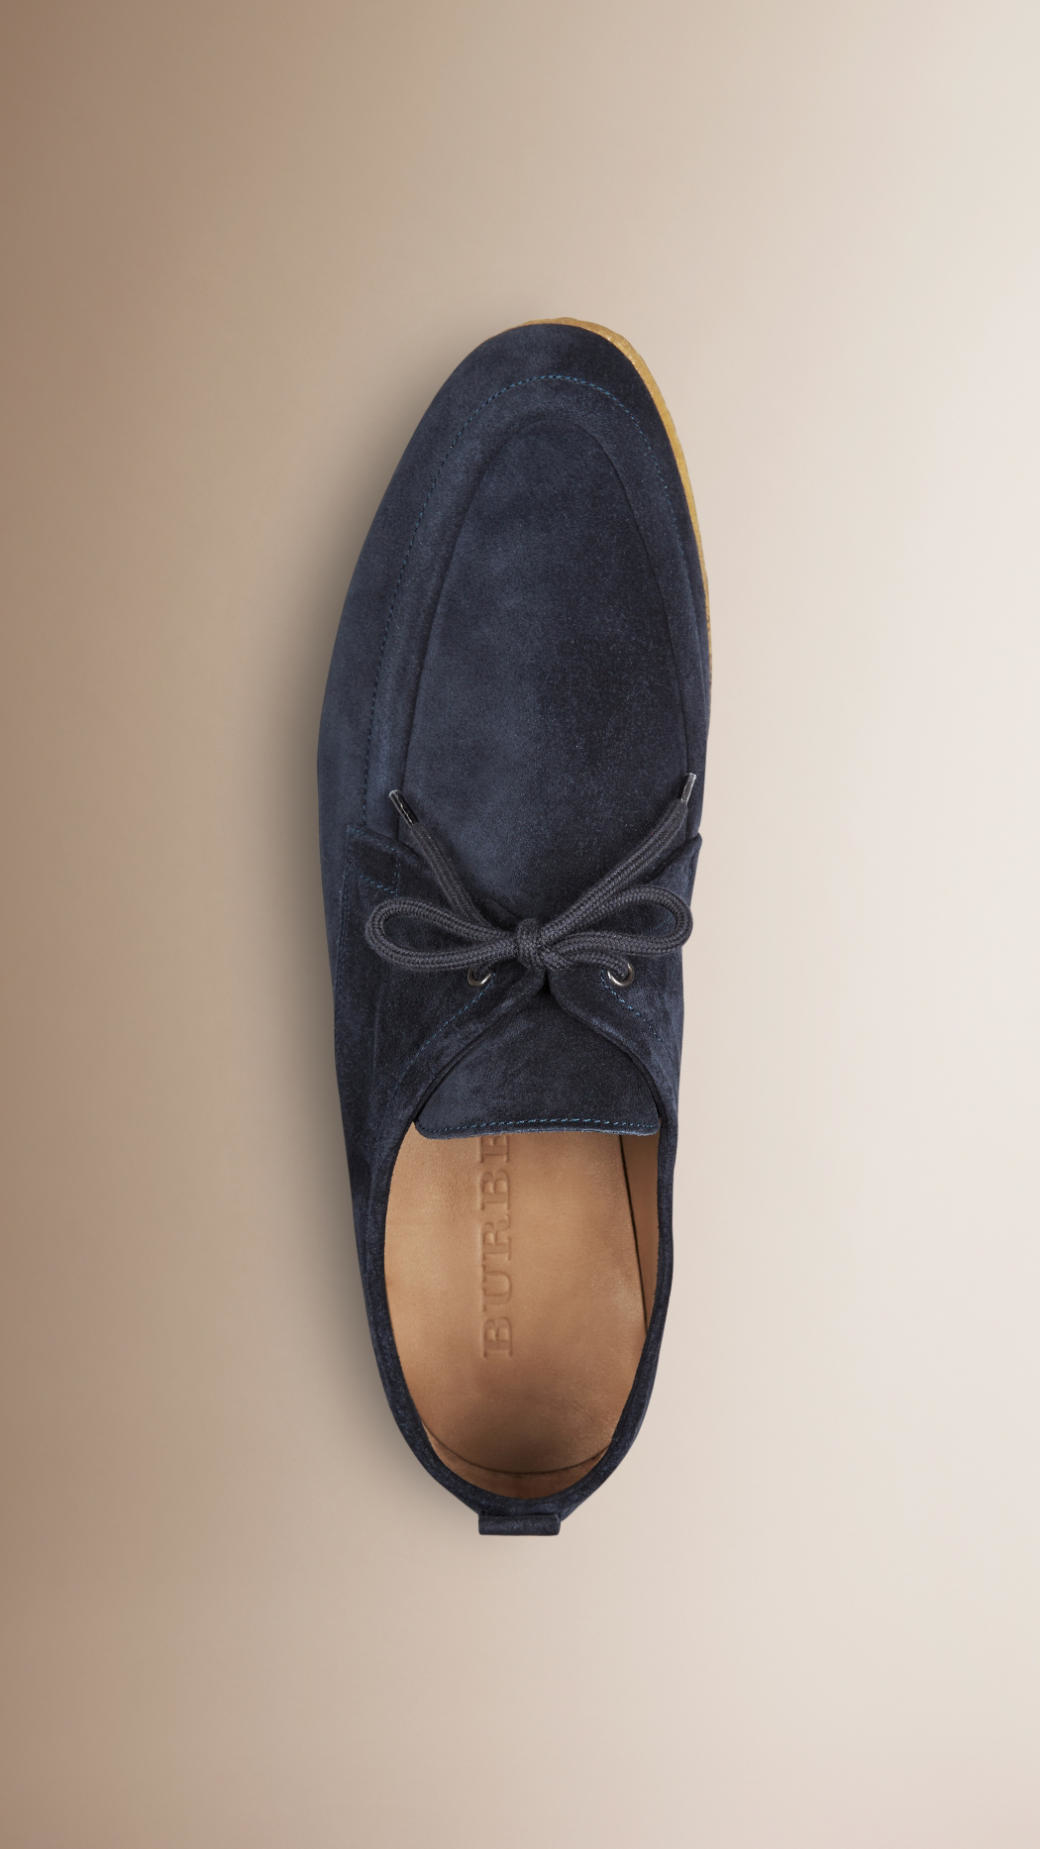 Burberry Crepe Sole Suede Shoes Navy in 